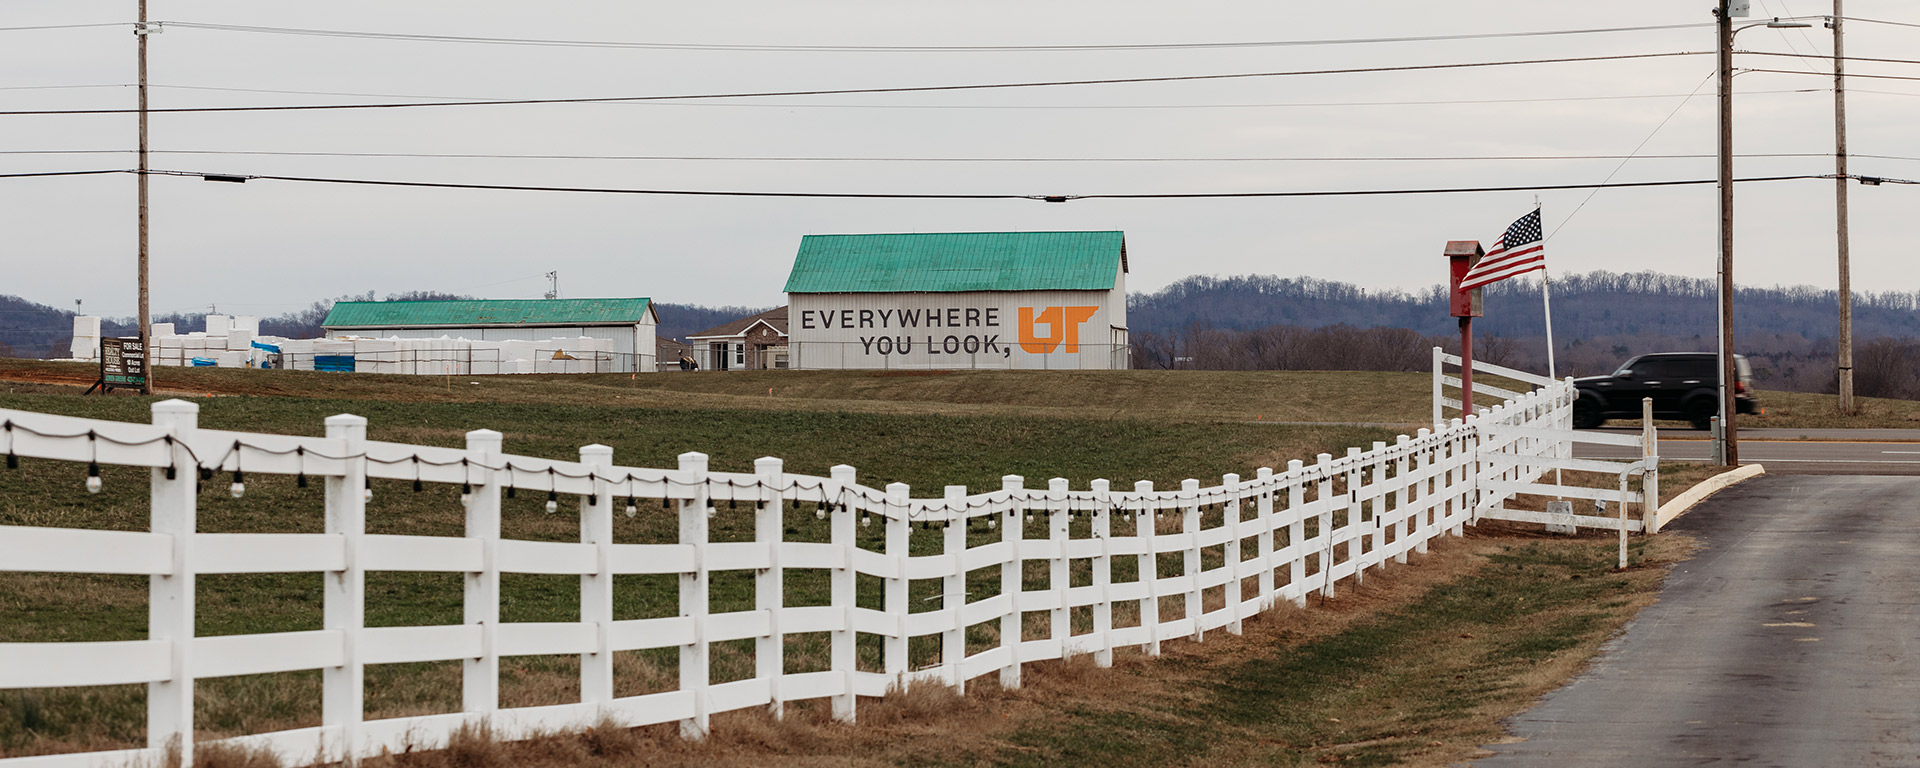 The 35th UT mural in a statewide campaign can be seen by 21,000 travelers a day in Hamblen County. Photo By Stephanie Wilson